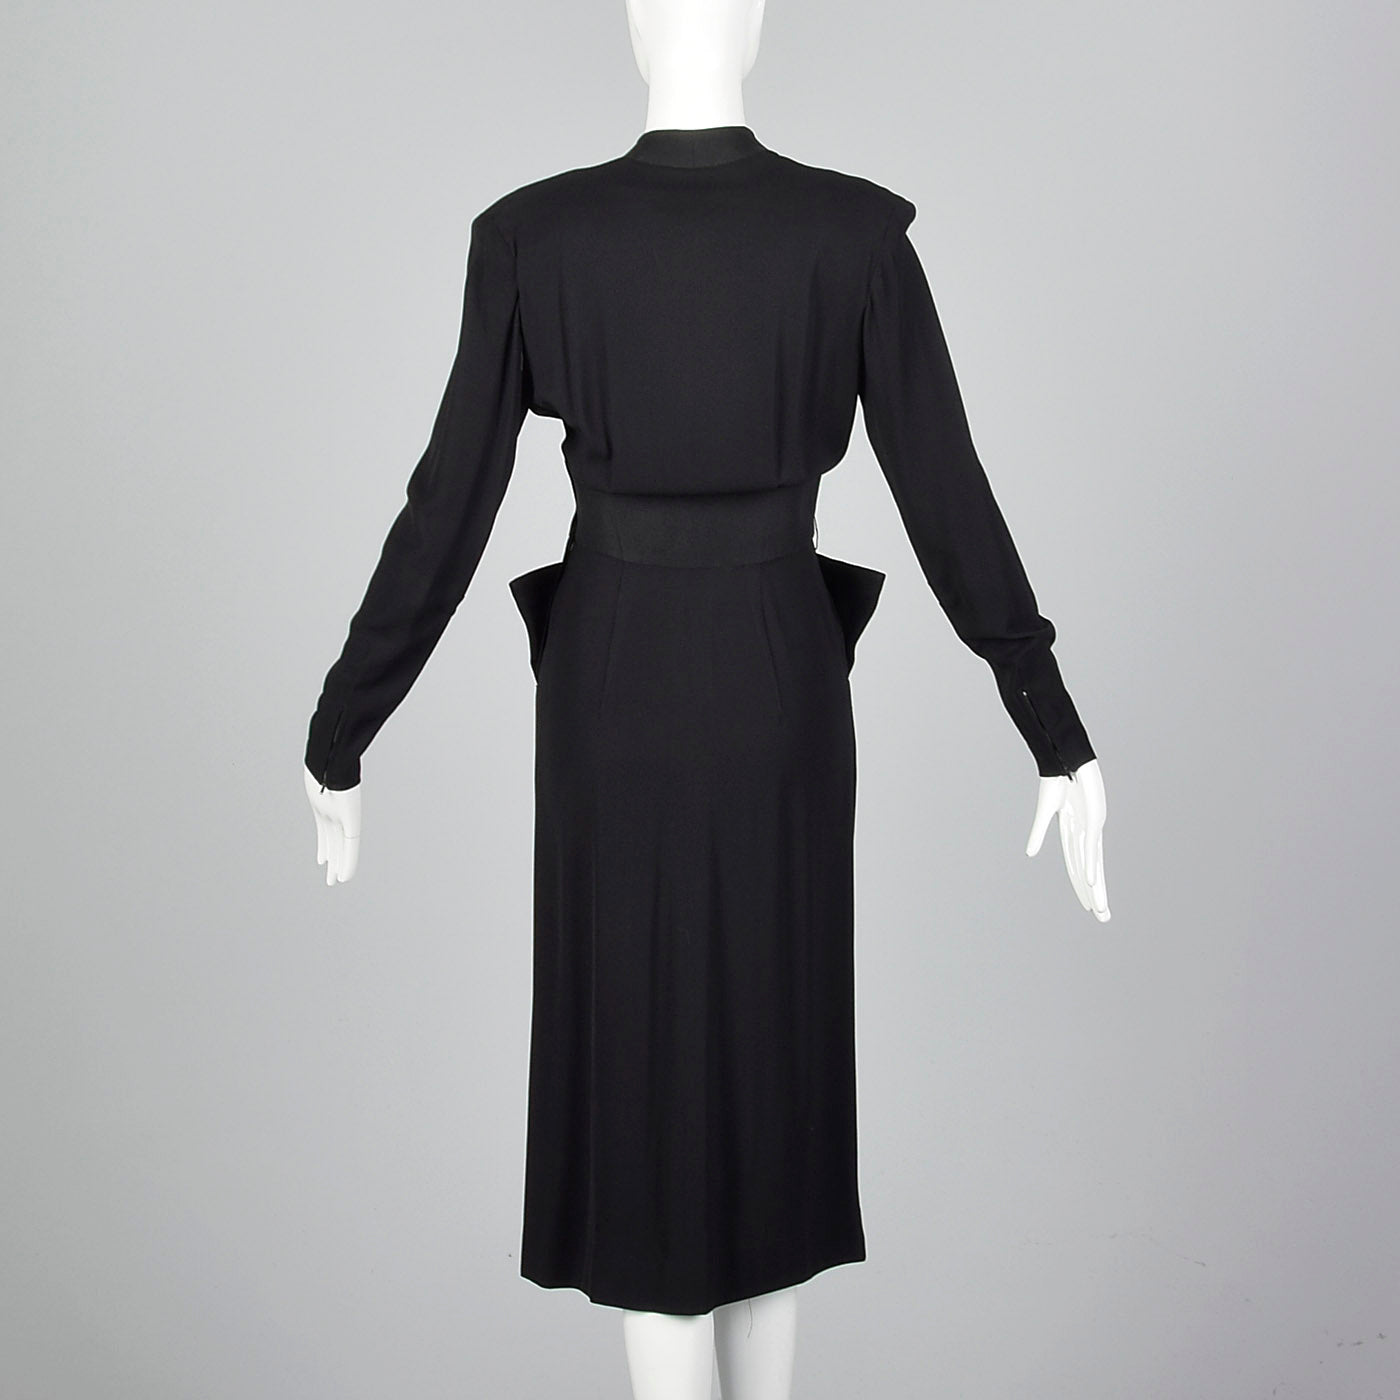 1940s Femme Fatale Black Rayon Dress with Pointed Pockets